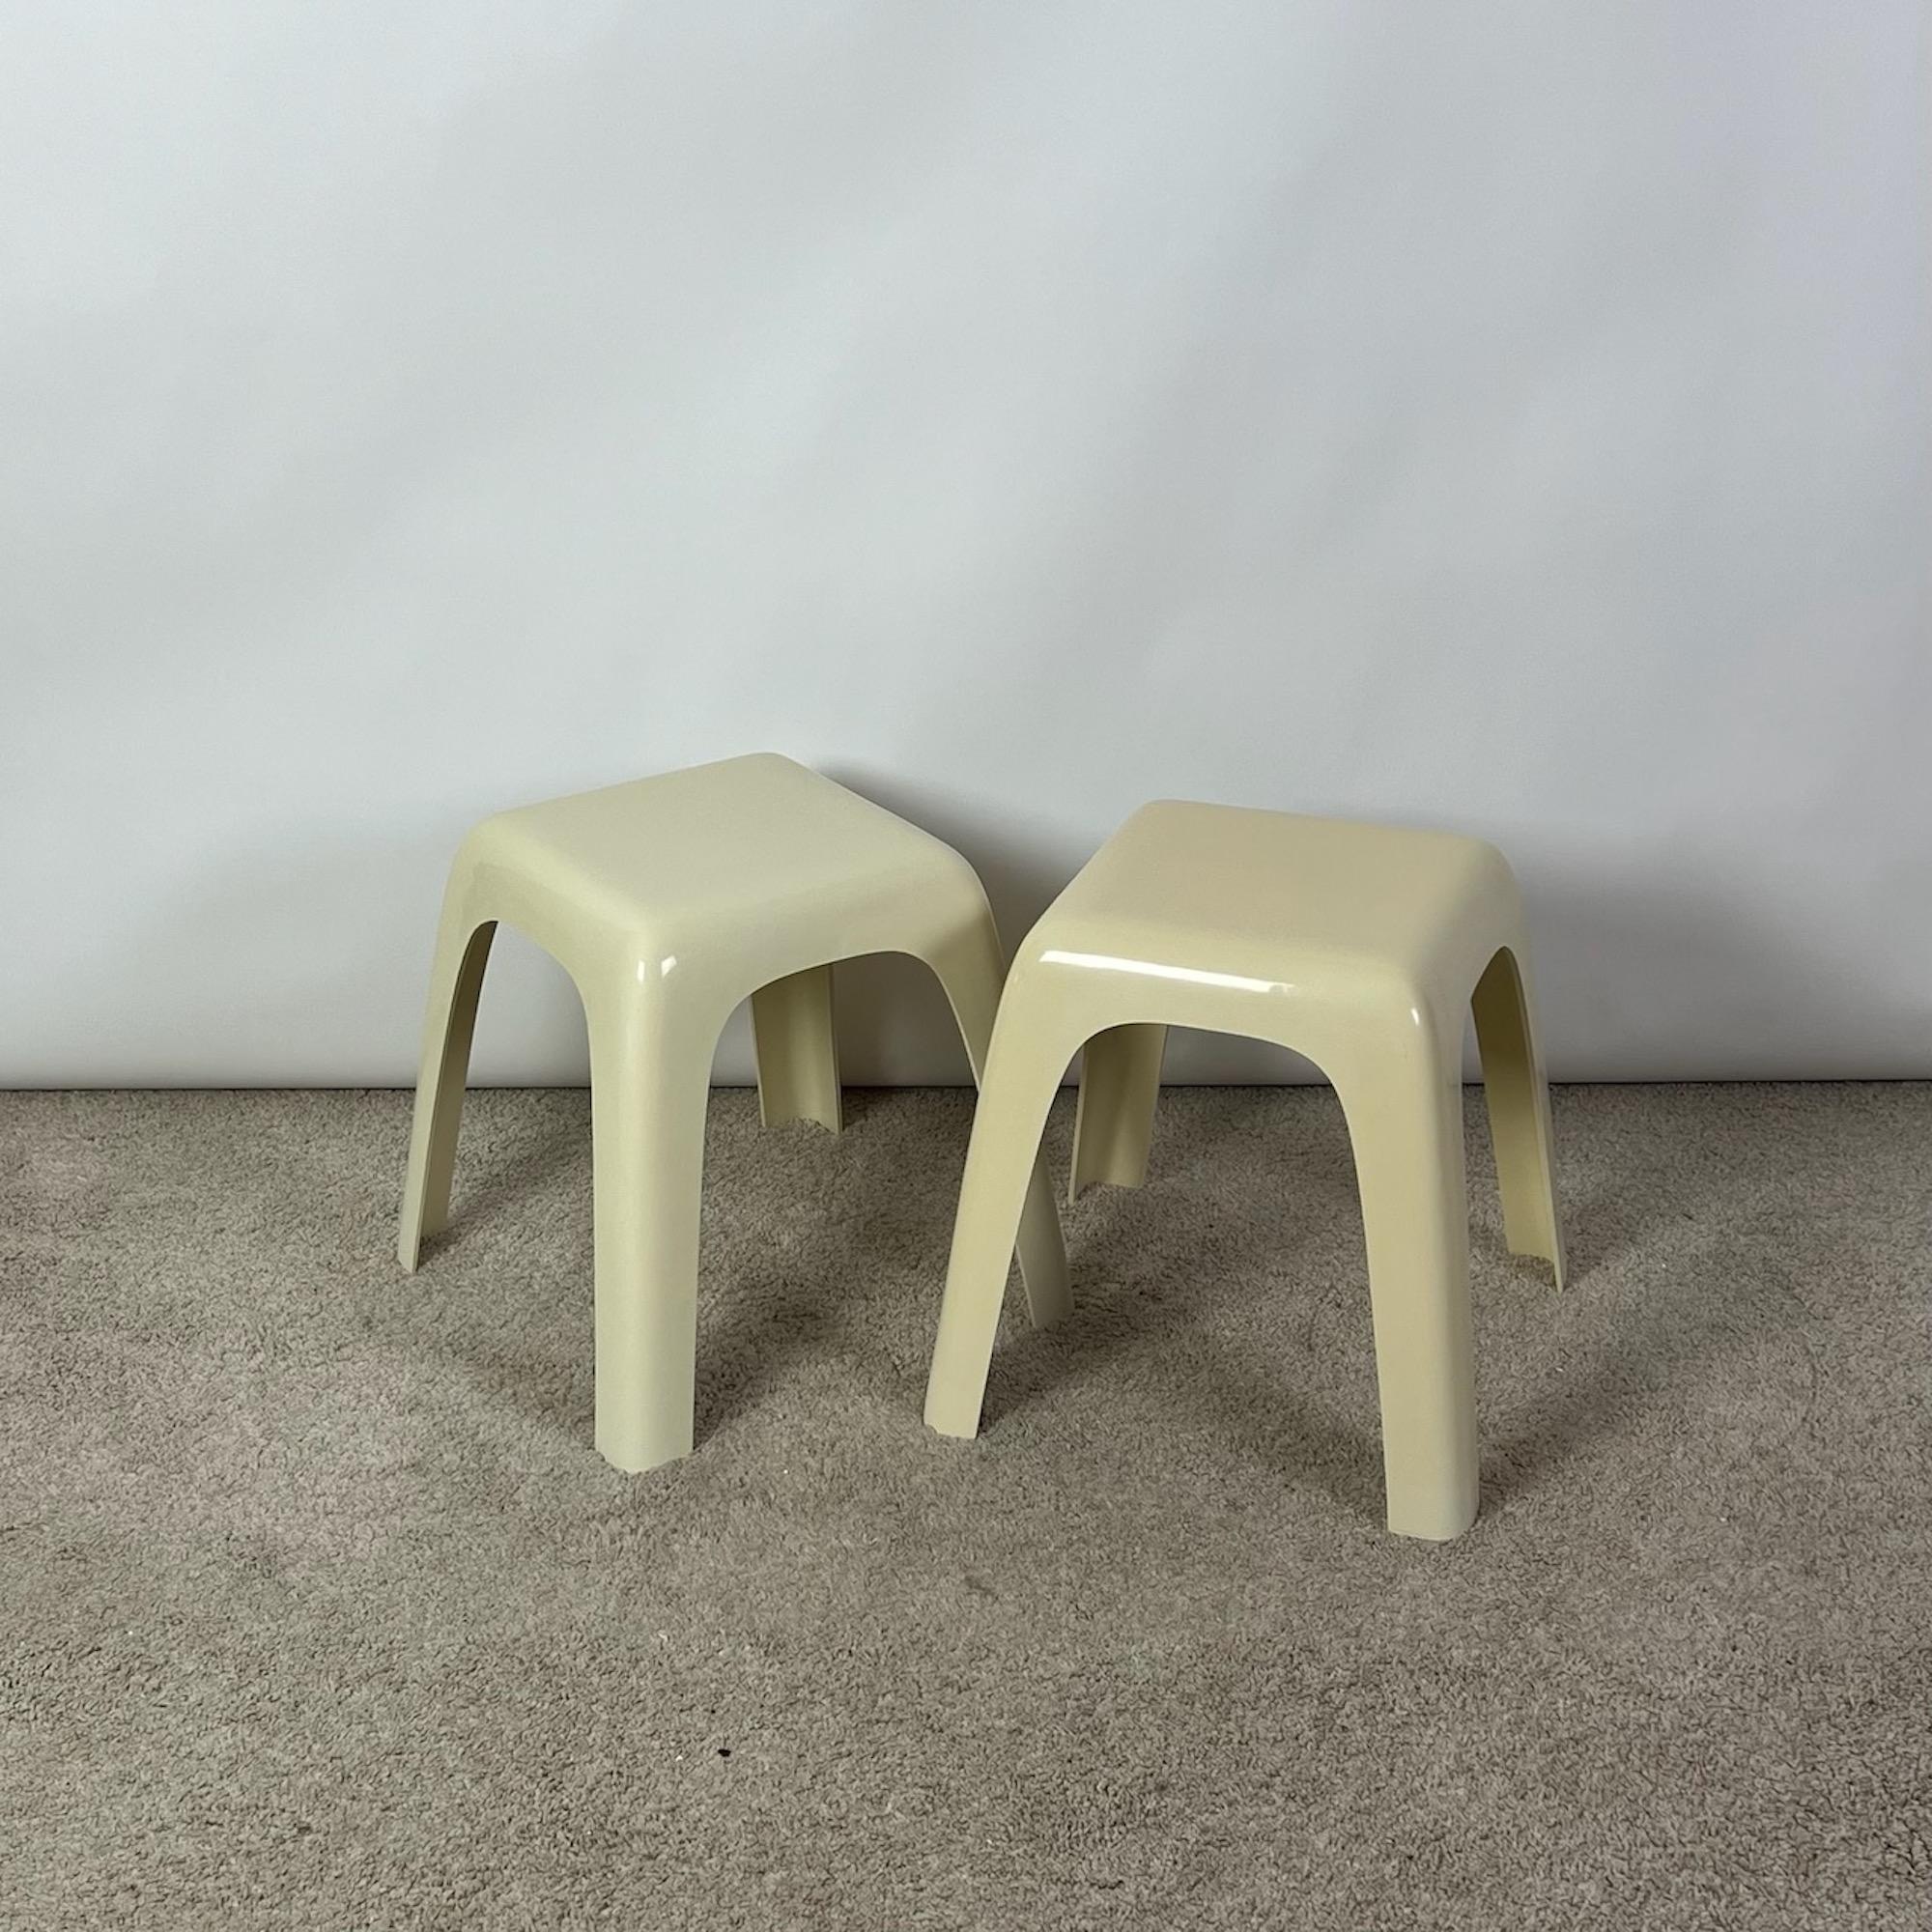 Industrial Set of tables / stools SMALL by Castiglioni Gaviraghi and Lanza for Valenti, 80s For Sale